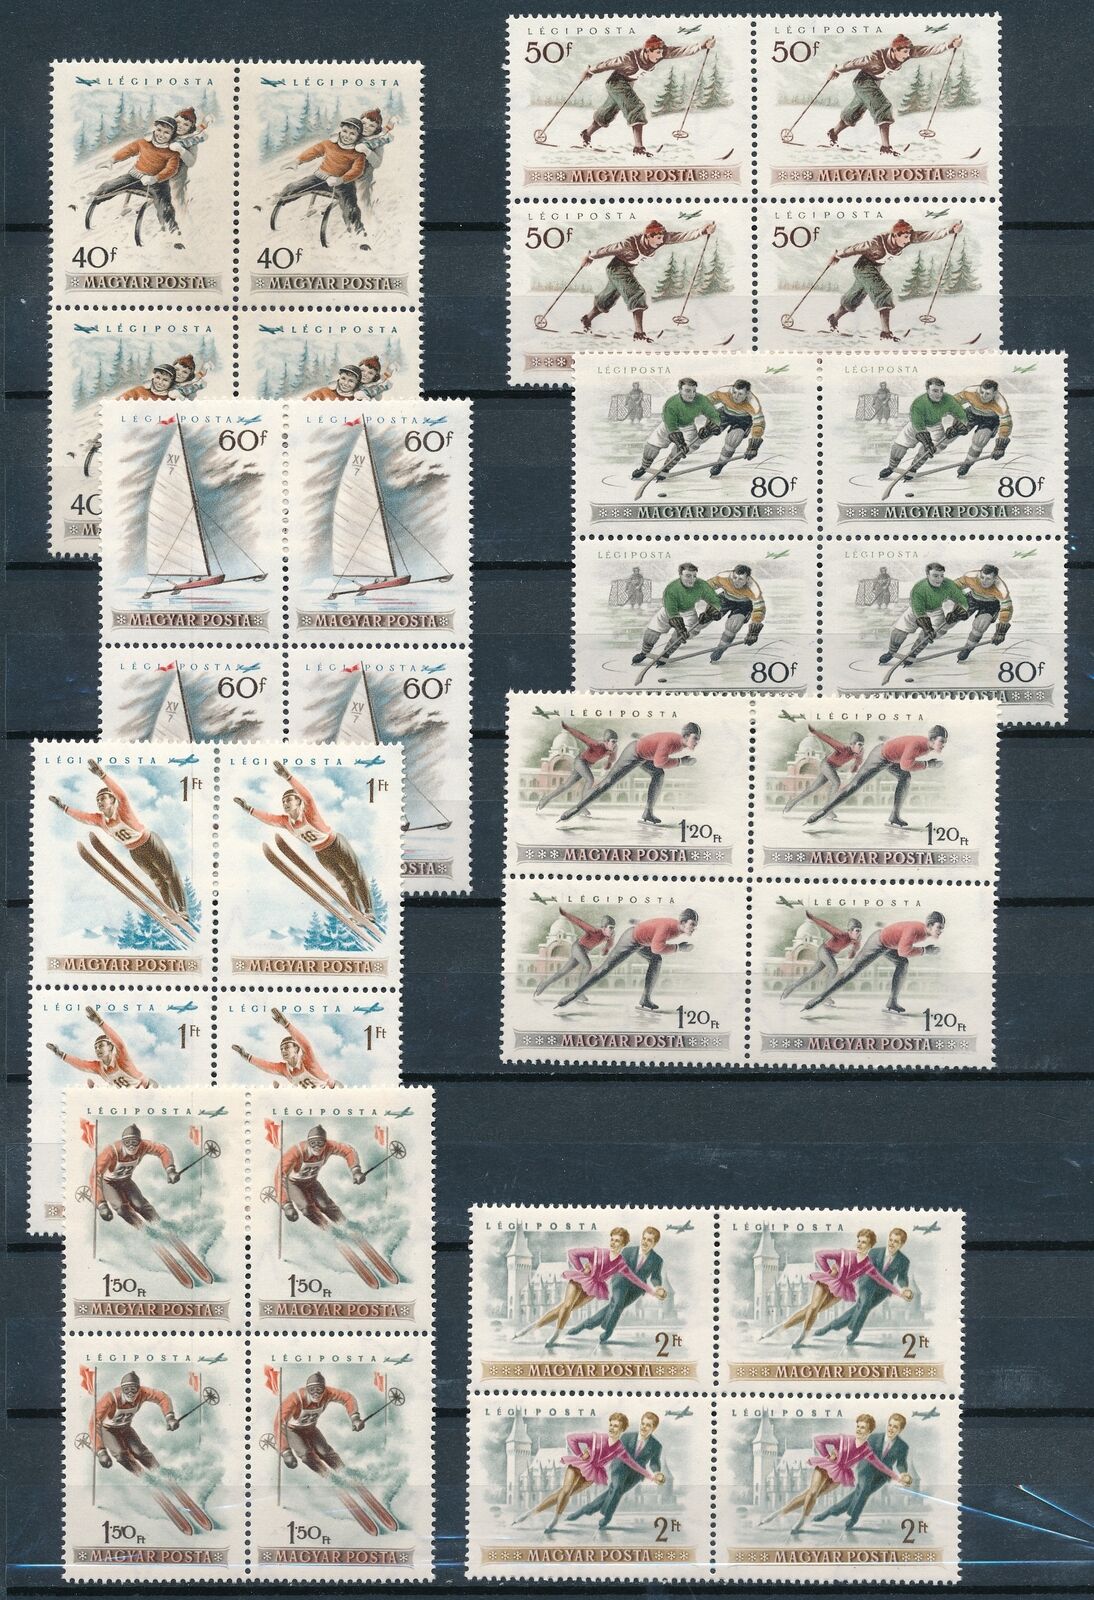 [pg10208] Hungary 1955 Olympics Good Set In Block Of 4 Stamps Very Fine Mnh $68